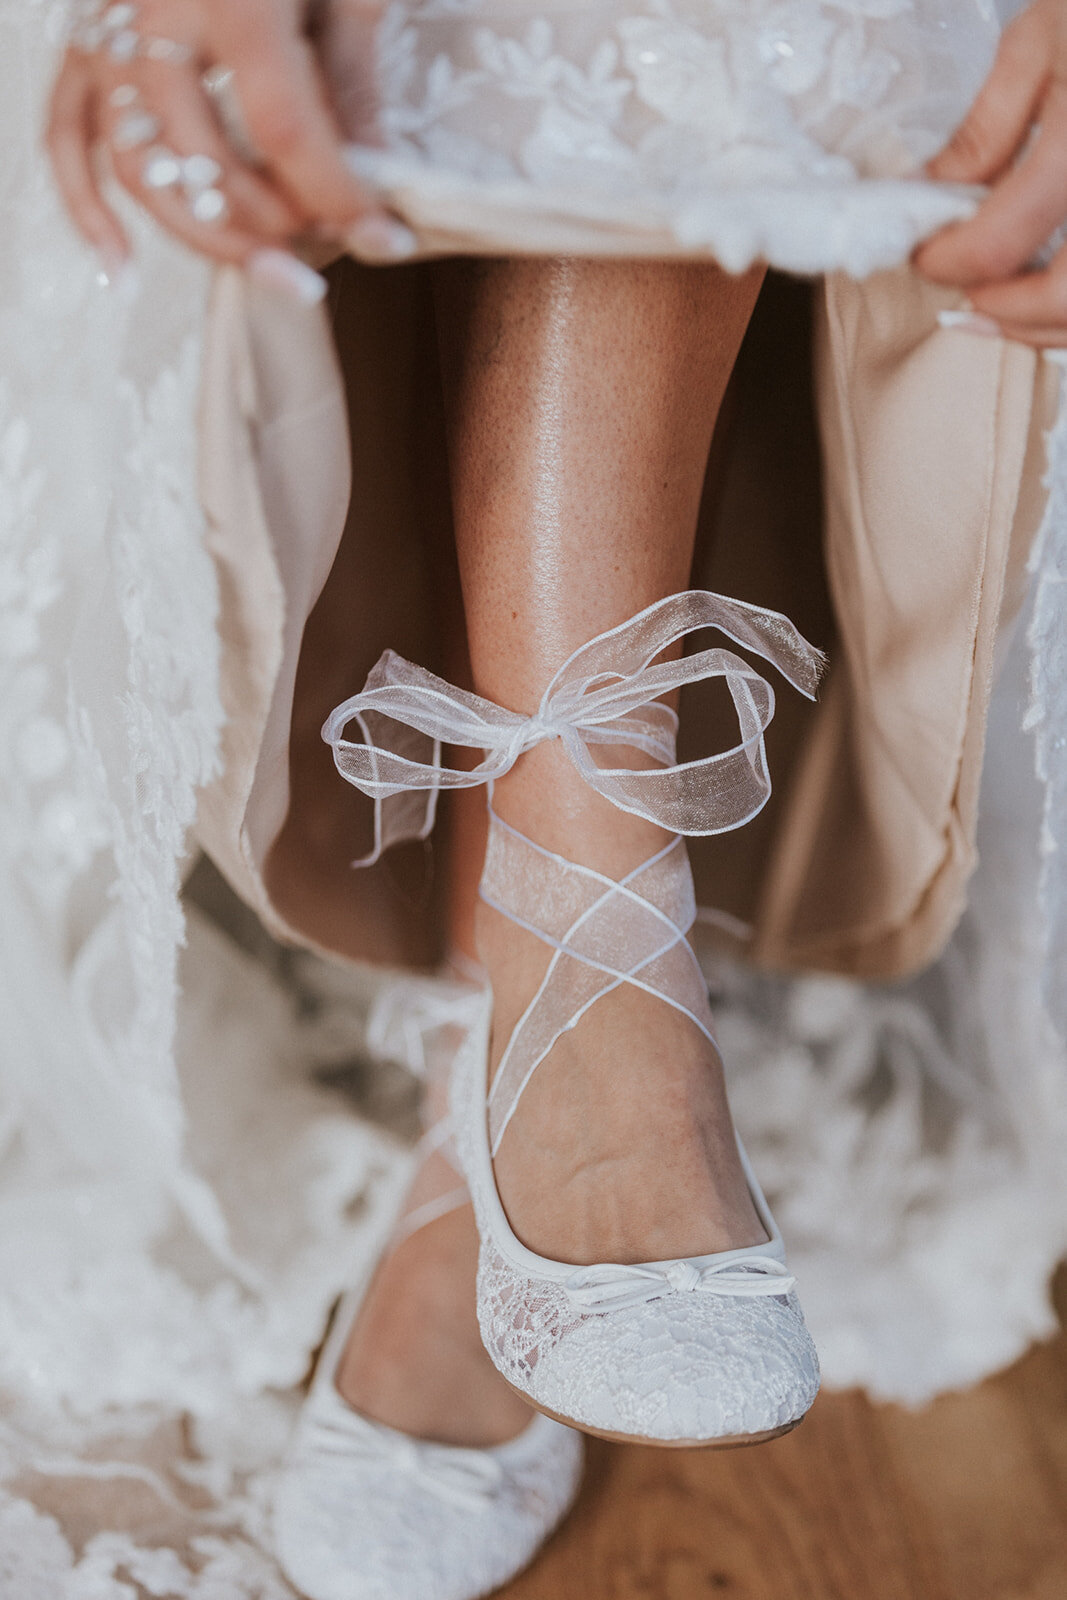 Shoes of the bride